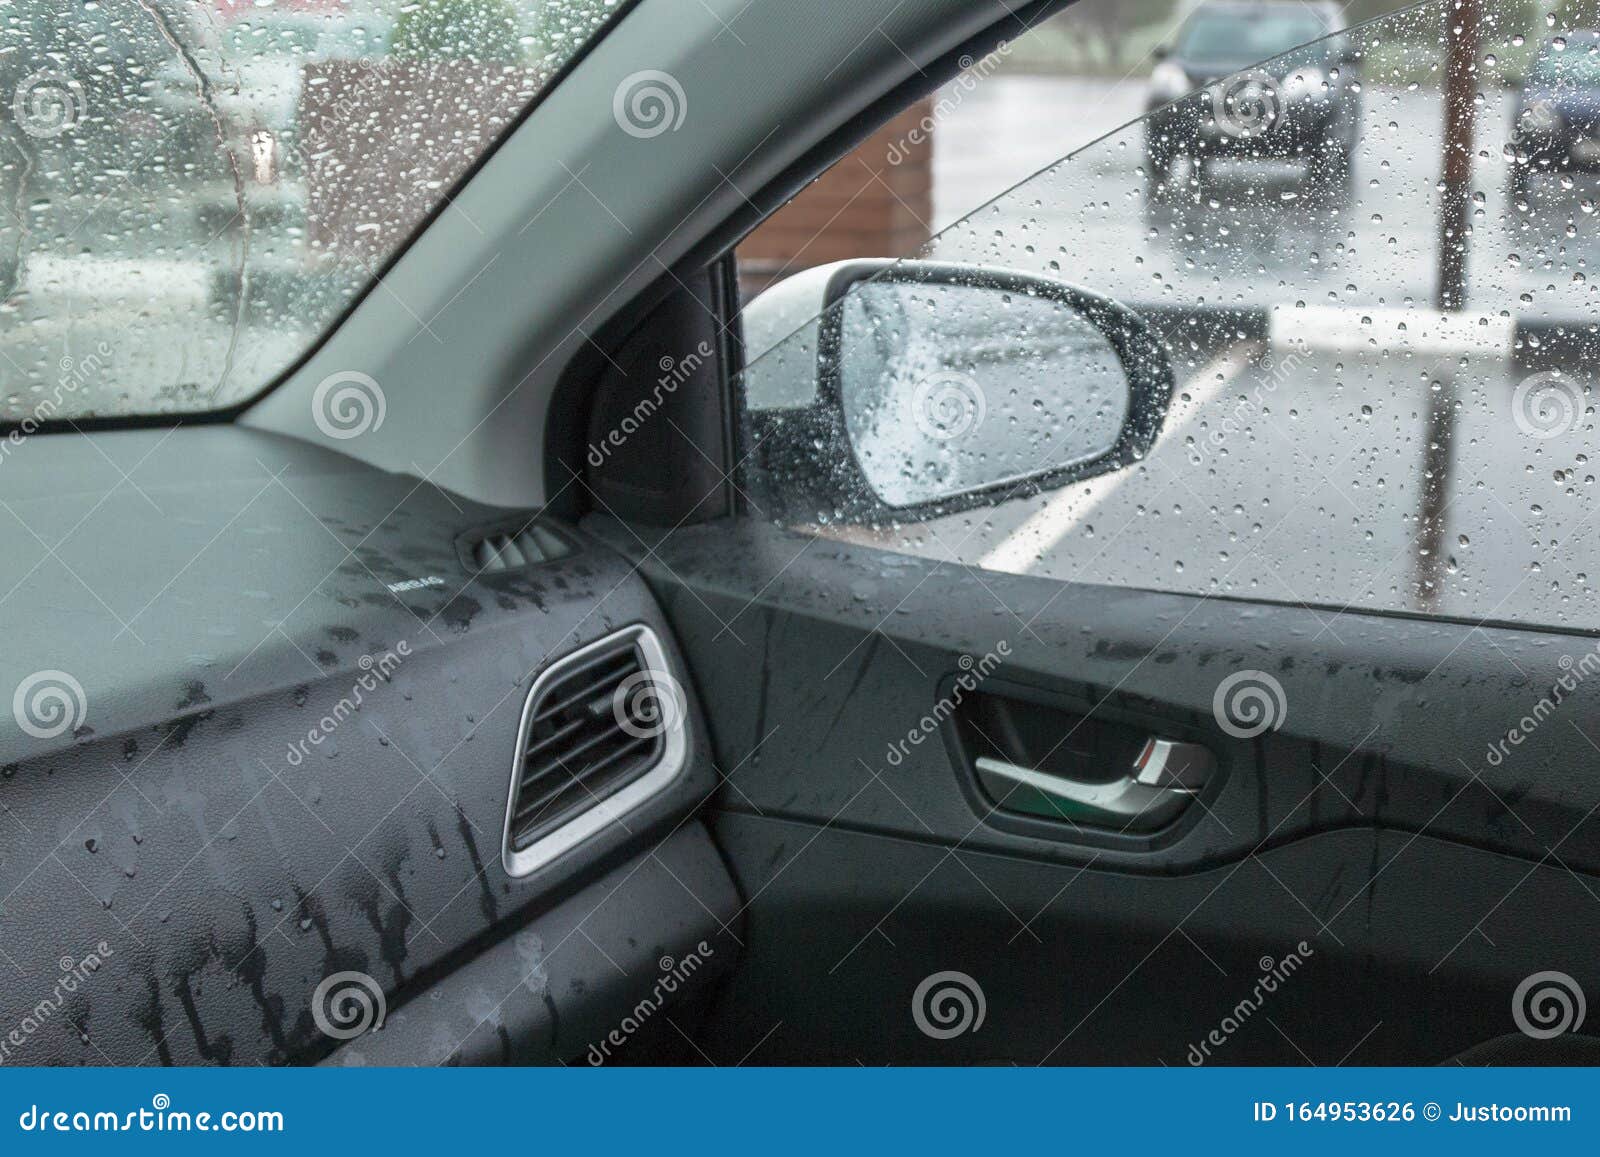 15+ Thousand Car Window Spray Royalty-Free Images, Stock Photos & Pictures